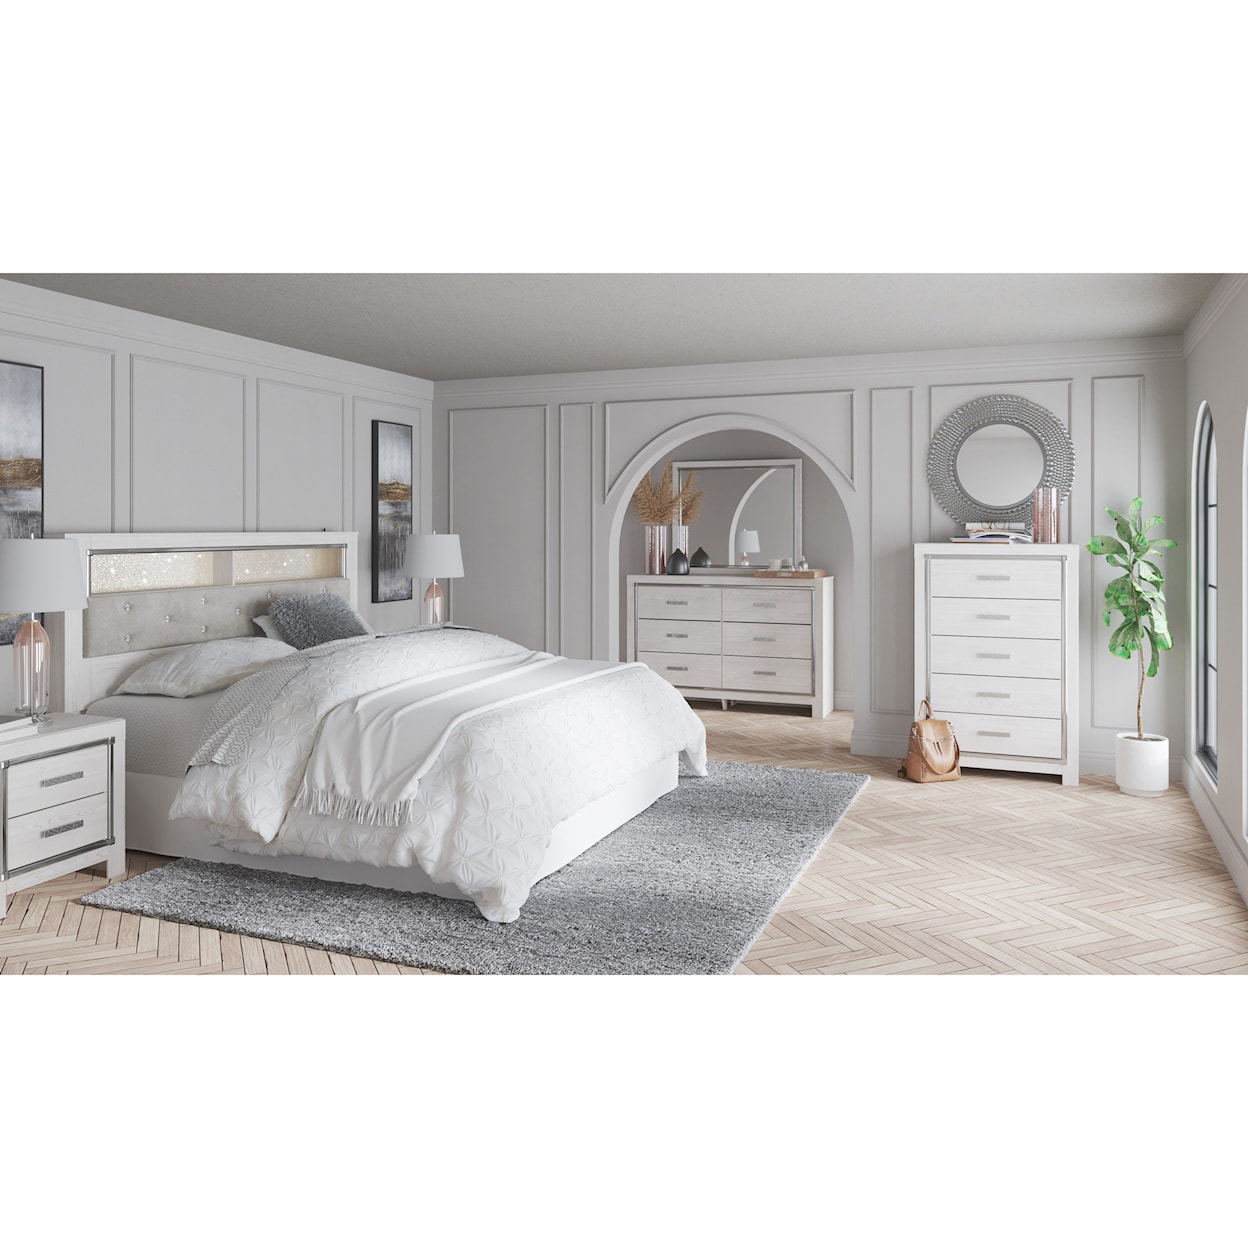 Signature Design by Ashley Altyra King Bedroom Group